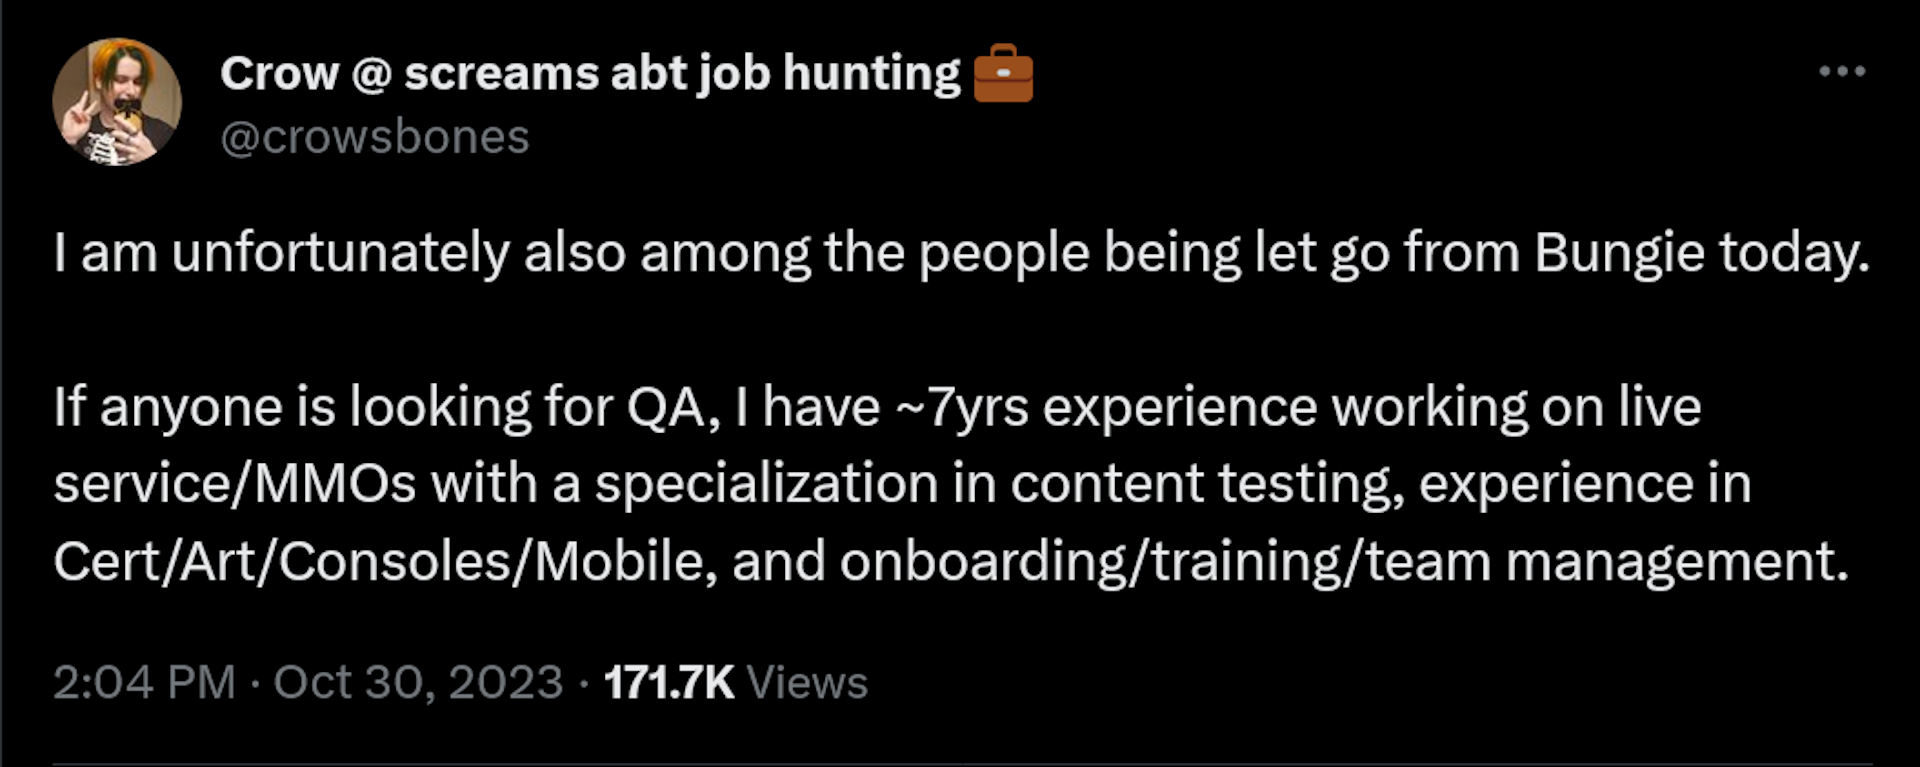 I am unfortunately also among the people being let go from Bungie today. If anyone is looking for QA, I have ~7yrs experience working on live service/MMOs with a specialization in content testing, experience in Cert/Art/Consoles/Mobile, and onboarding/training/team management.